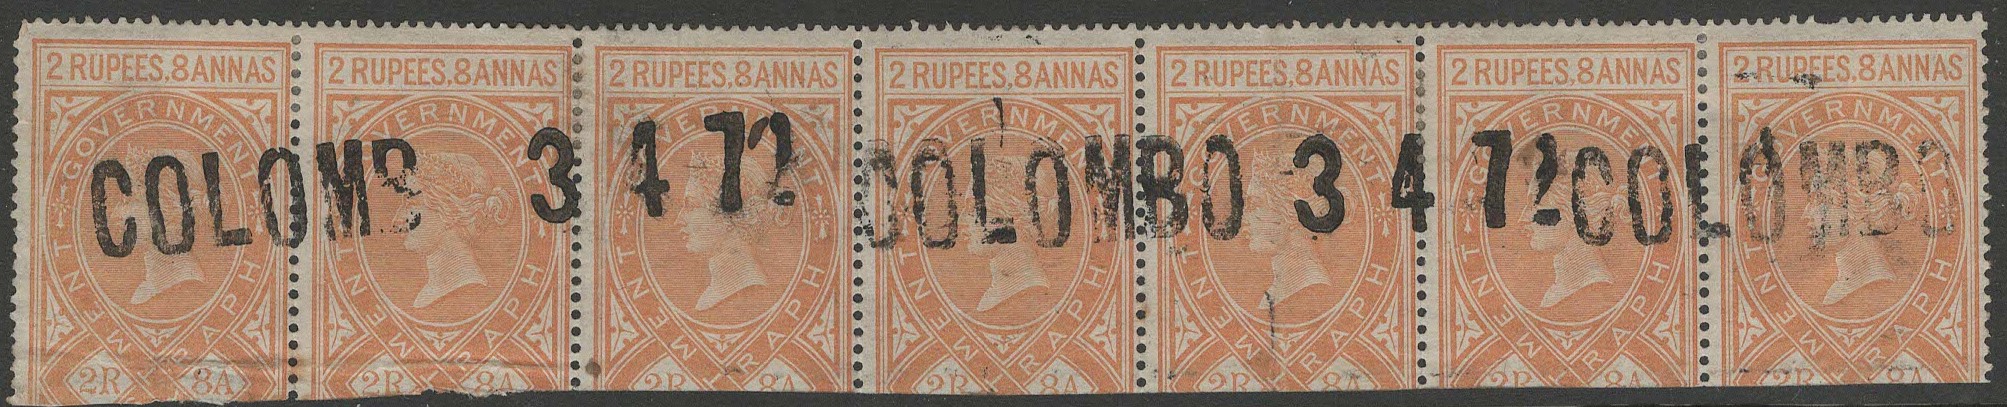 Cancels-Colombo-unboxed of 1872